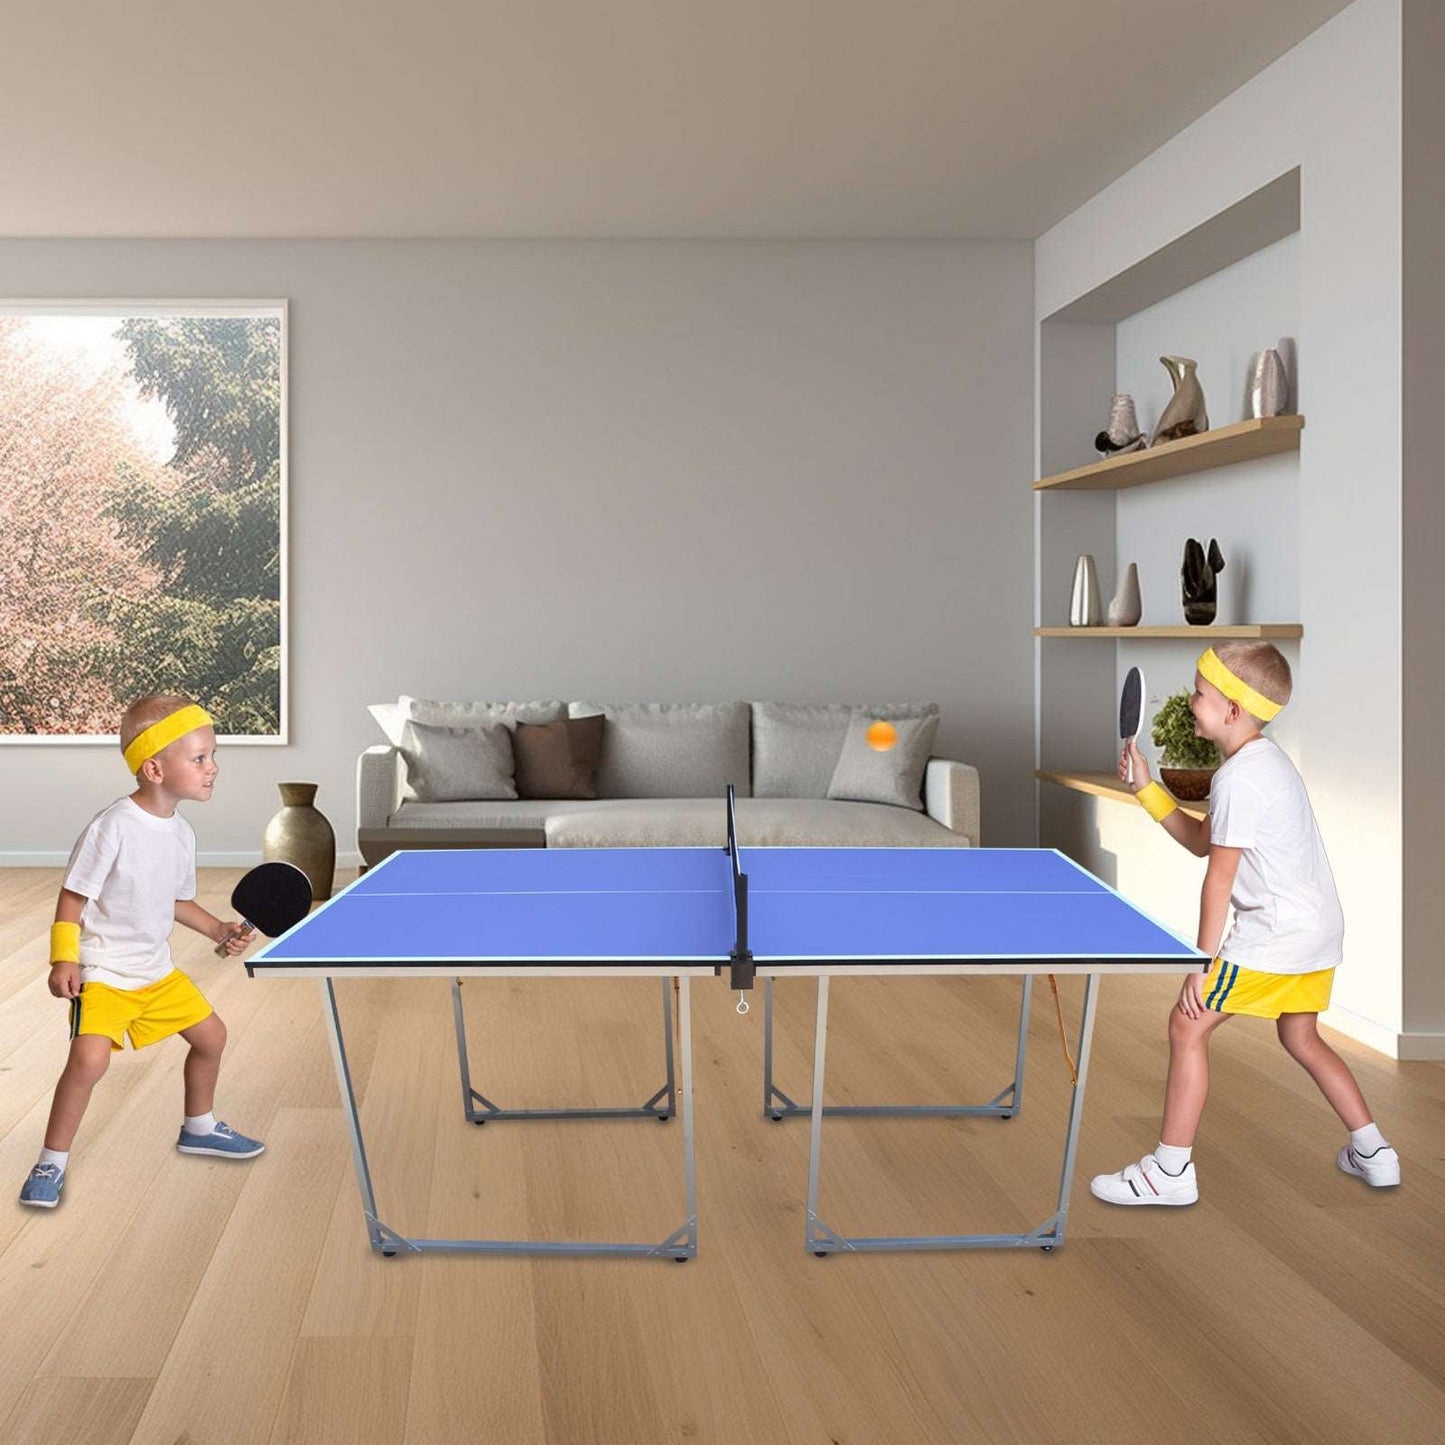 6ft Mid-Size Table Tennis Table Foldable & Portable Ping Pong Table Set for Indoor & Outdoor Games with Net - Free Shipping - Aurelia Clothing